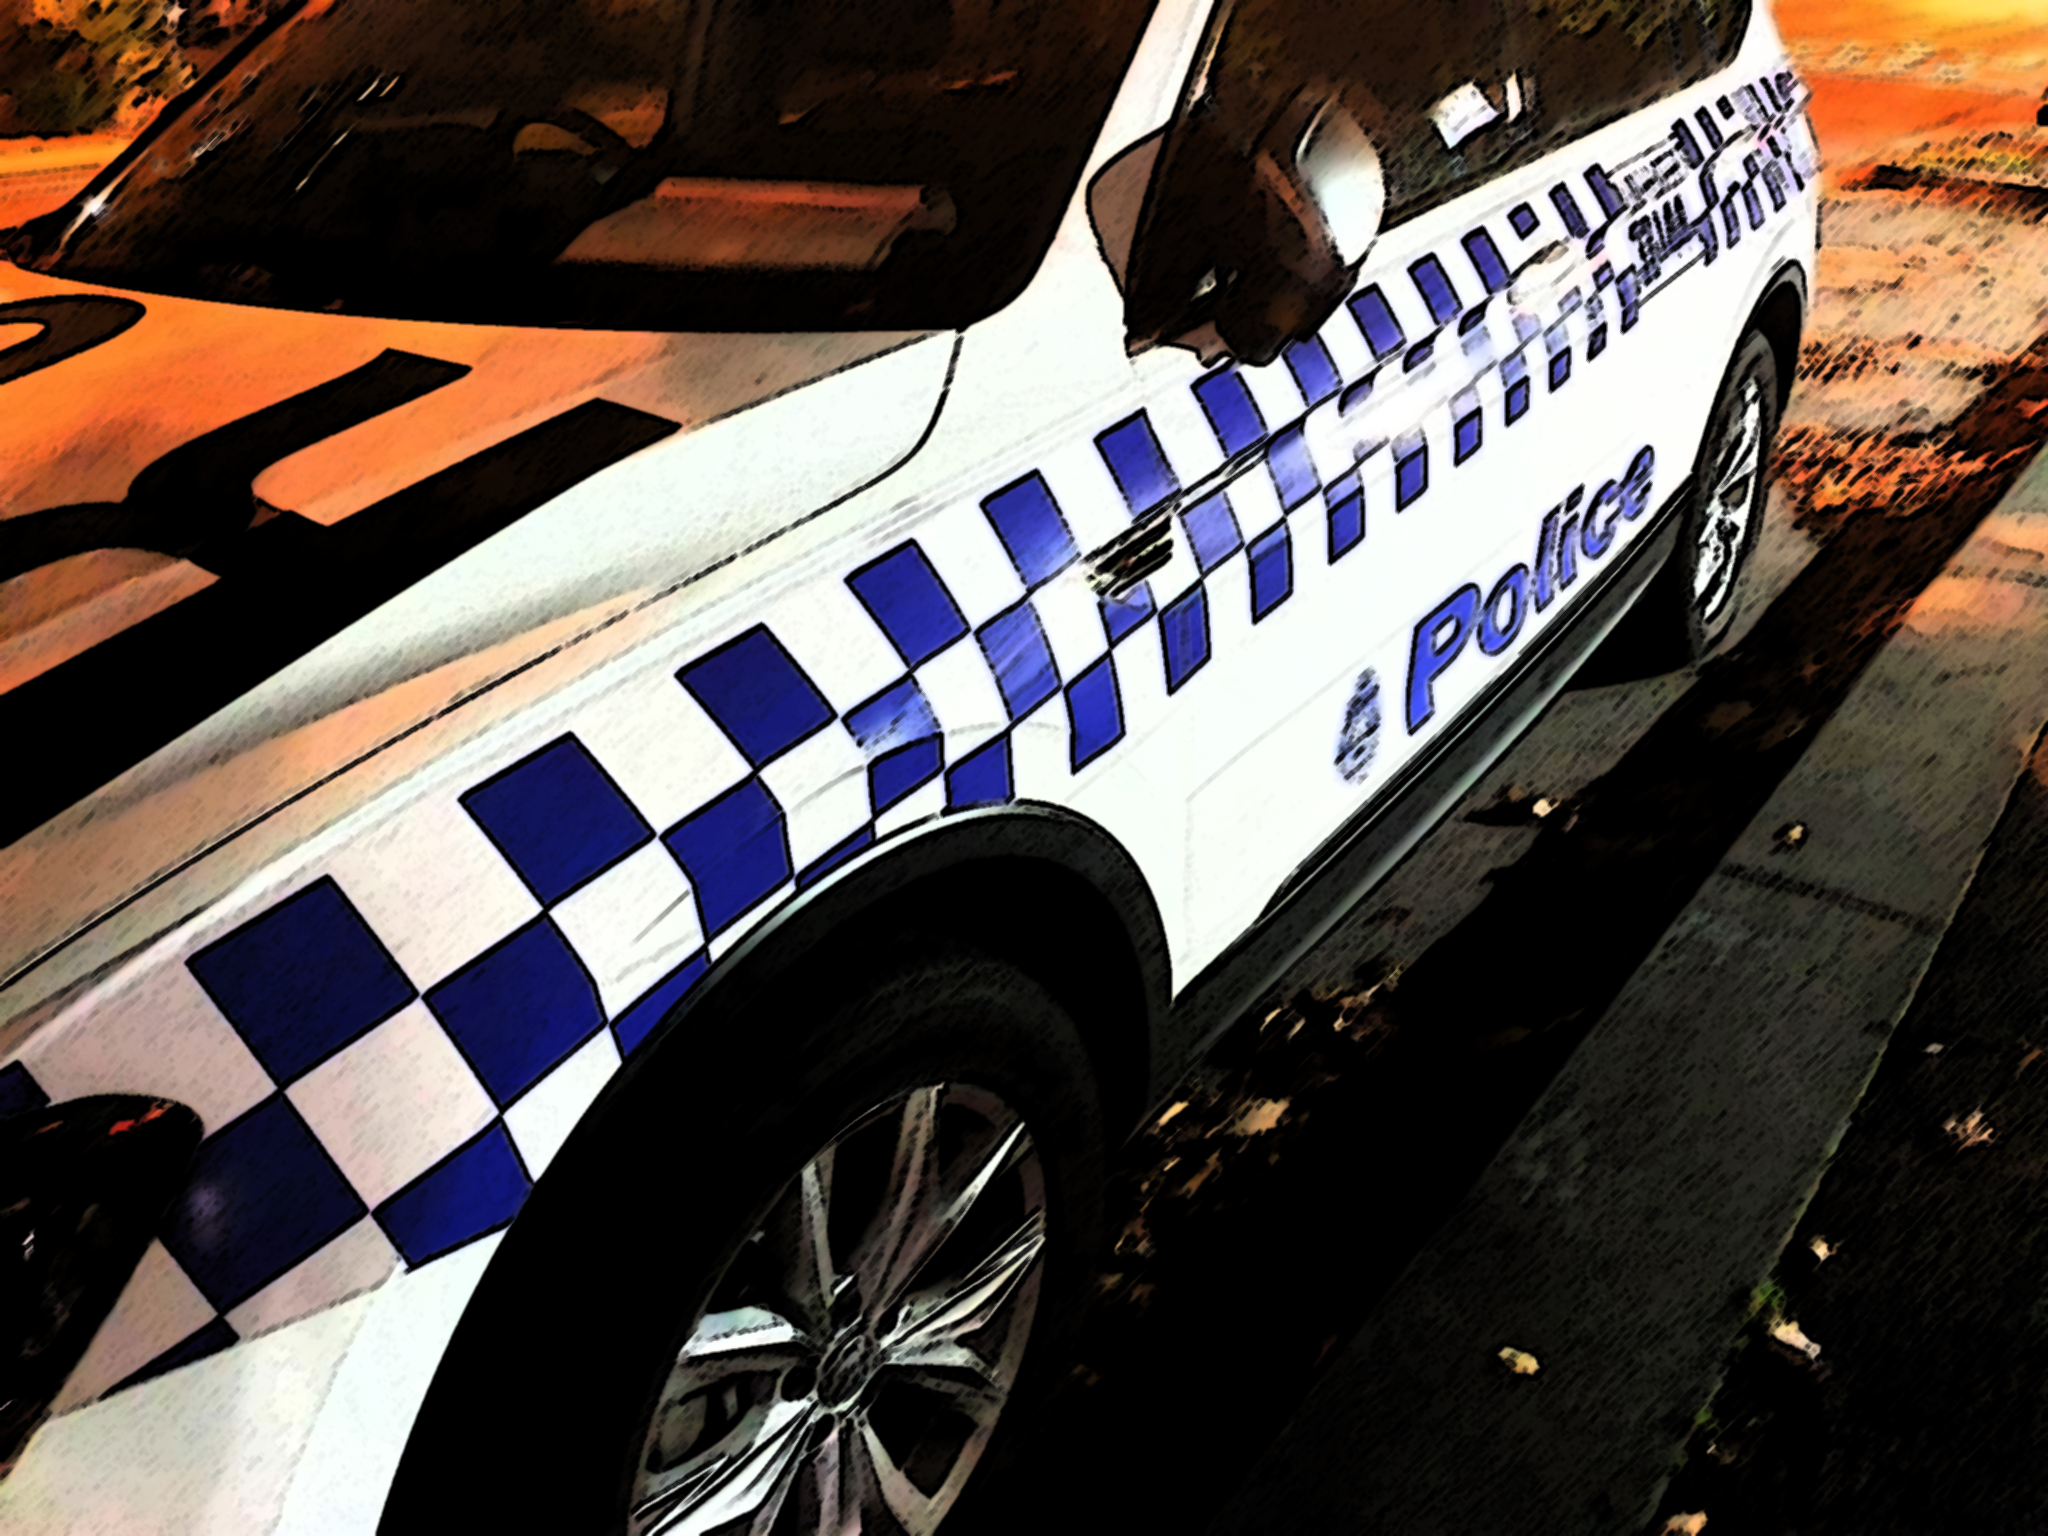 A white police car featuring the distinctive dark blue check pattern is parked next to a dark grey kerbside under orange street lights. Dark blue text on the side of the car reads Police